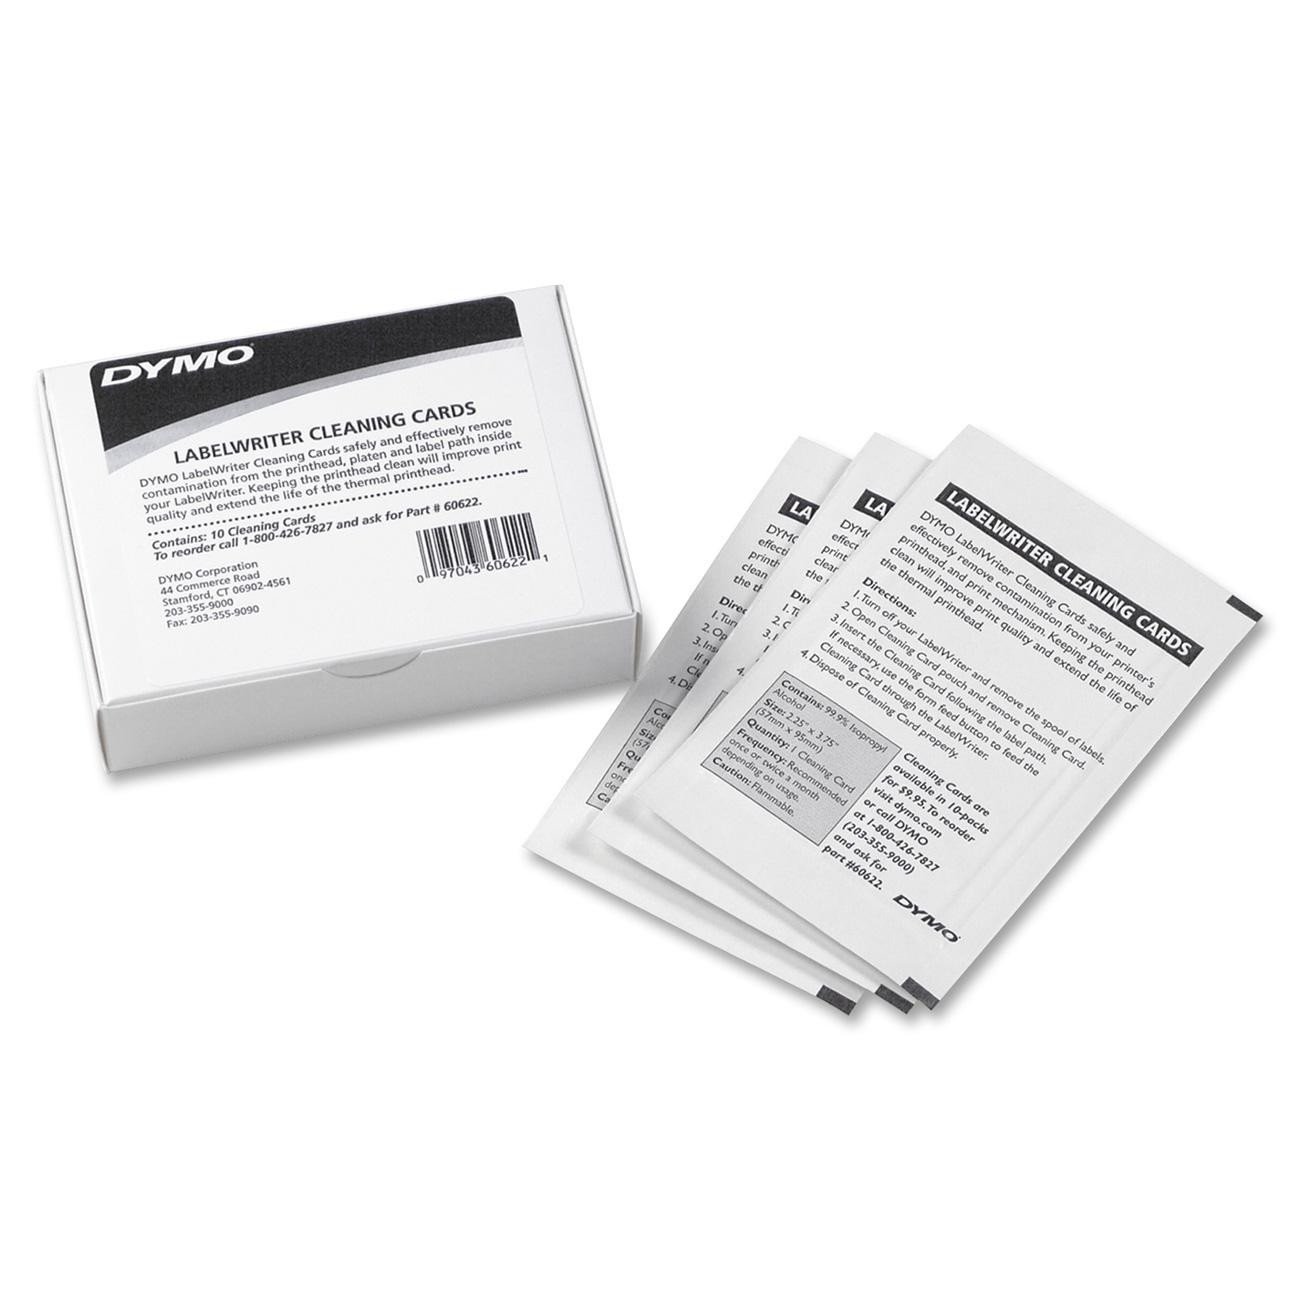 DYMO LabelWriter Cleaning Cards, 10/Box